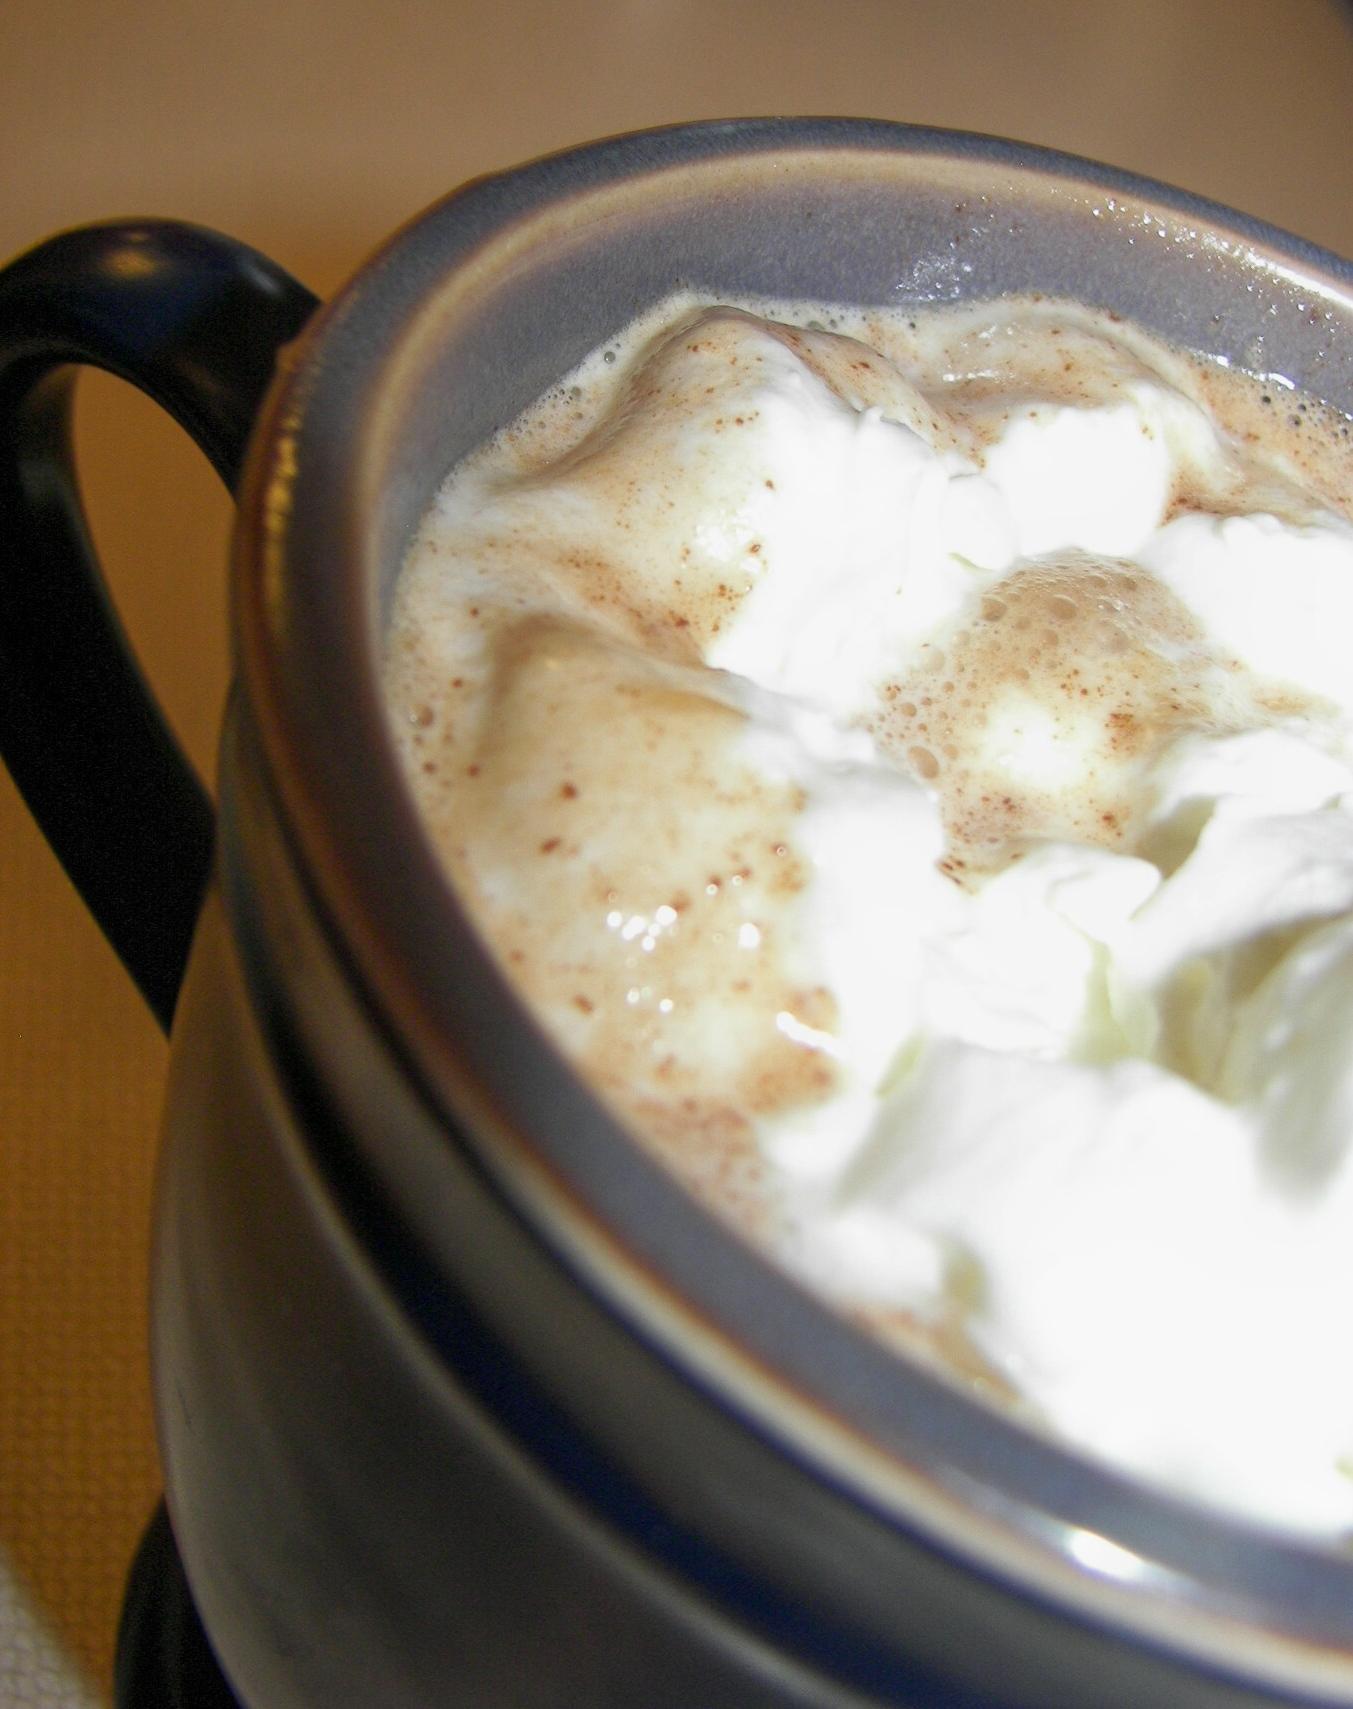  Warm up your day with our delicious White Chocolate Baileys Latte